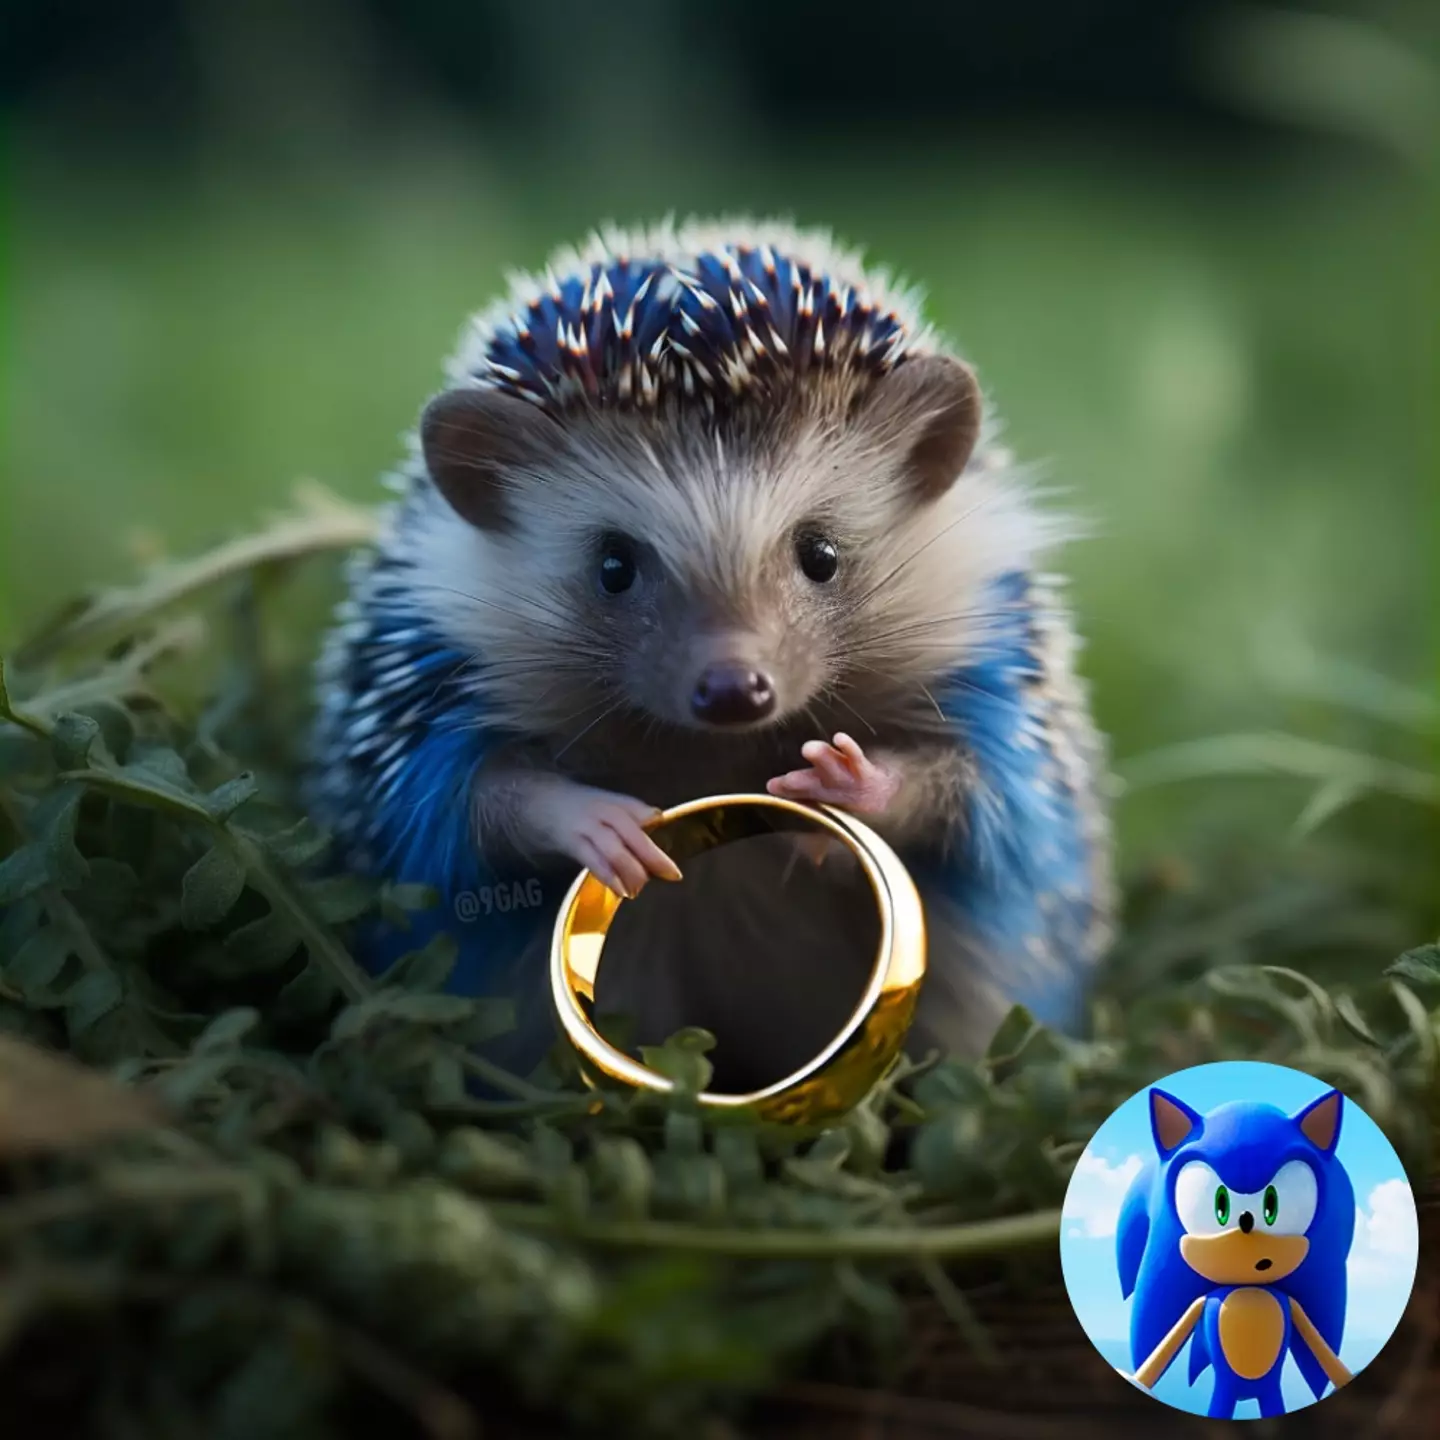 Yeah, actual hedgehogs look nothing like Sonic and can't go as fast.